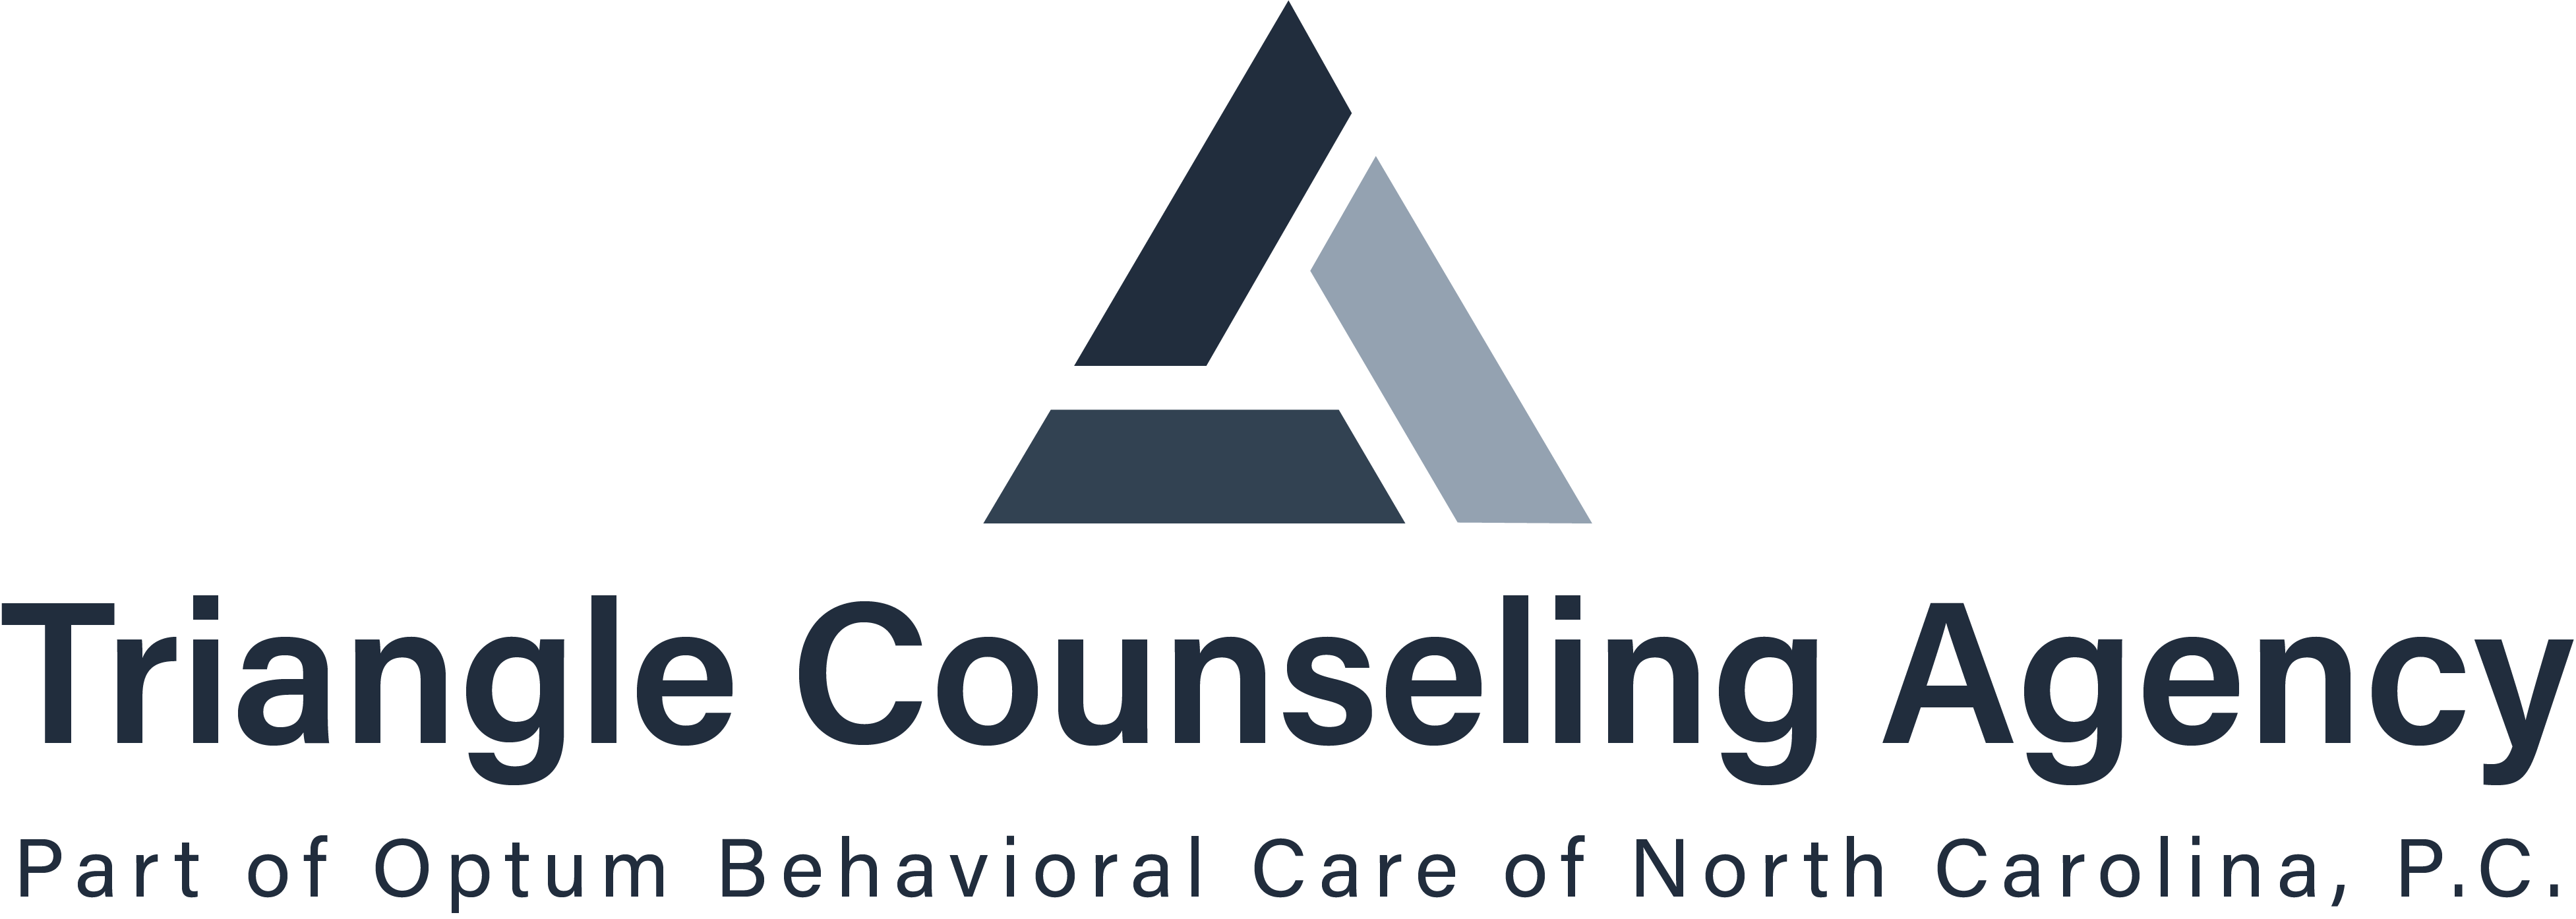 Triangle Counseling Agency of North Carolina